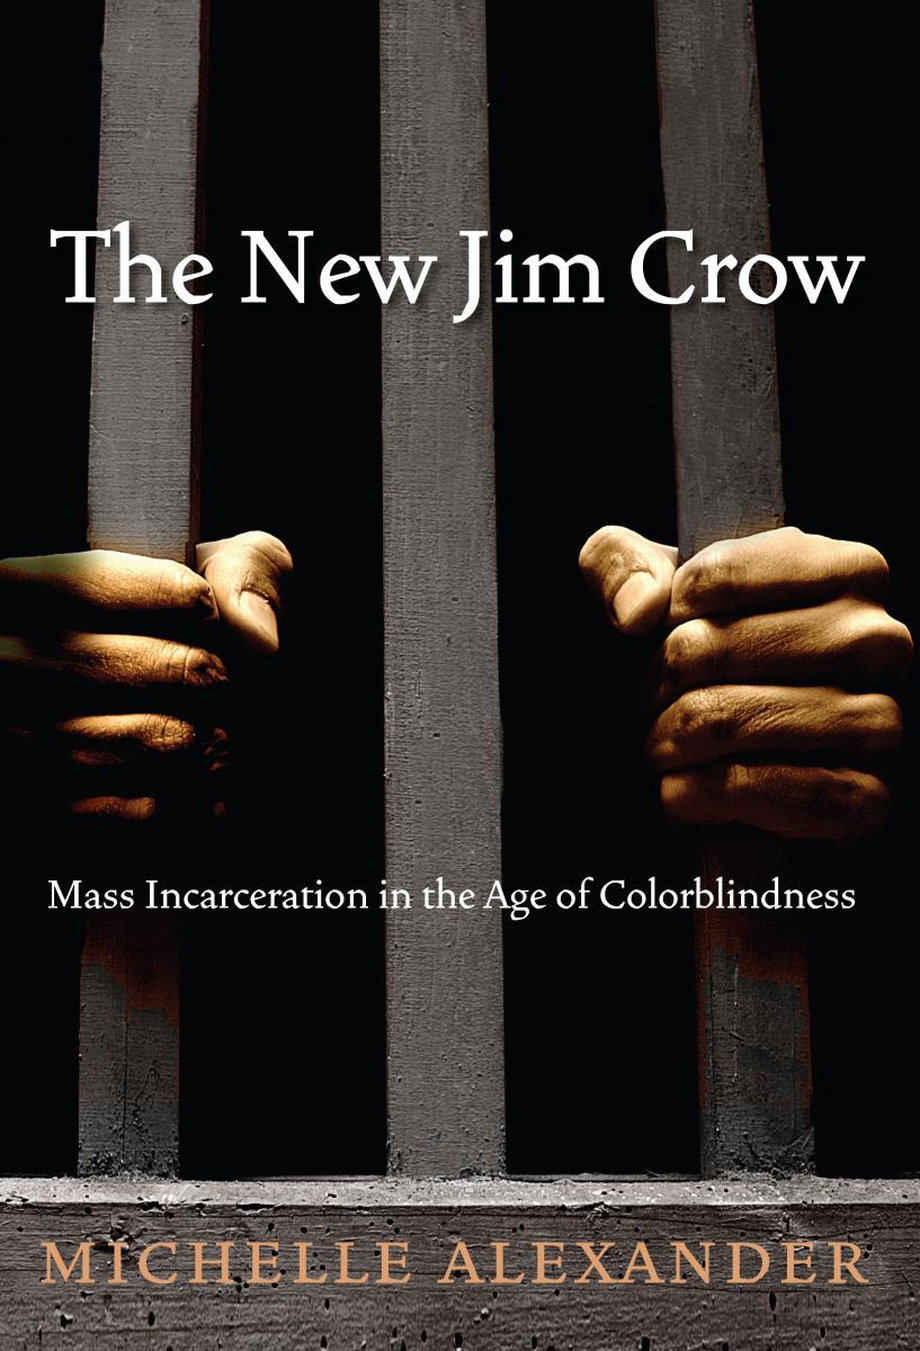 'The New Jim Crow' by Michelle Alexander